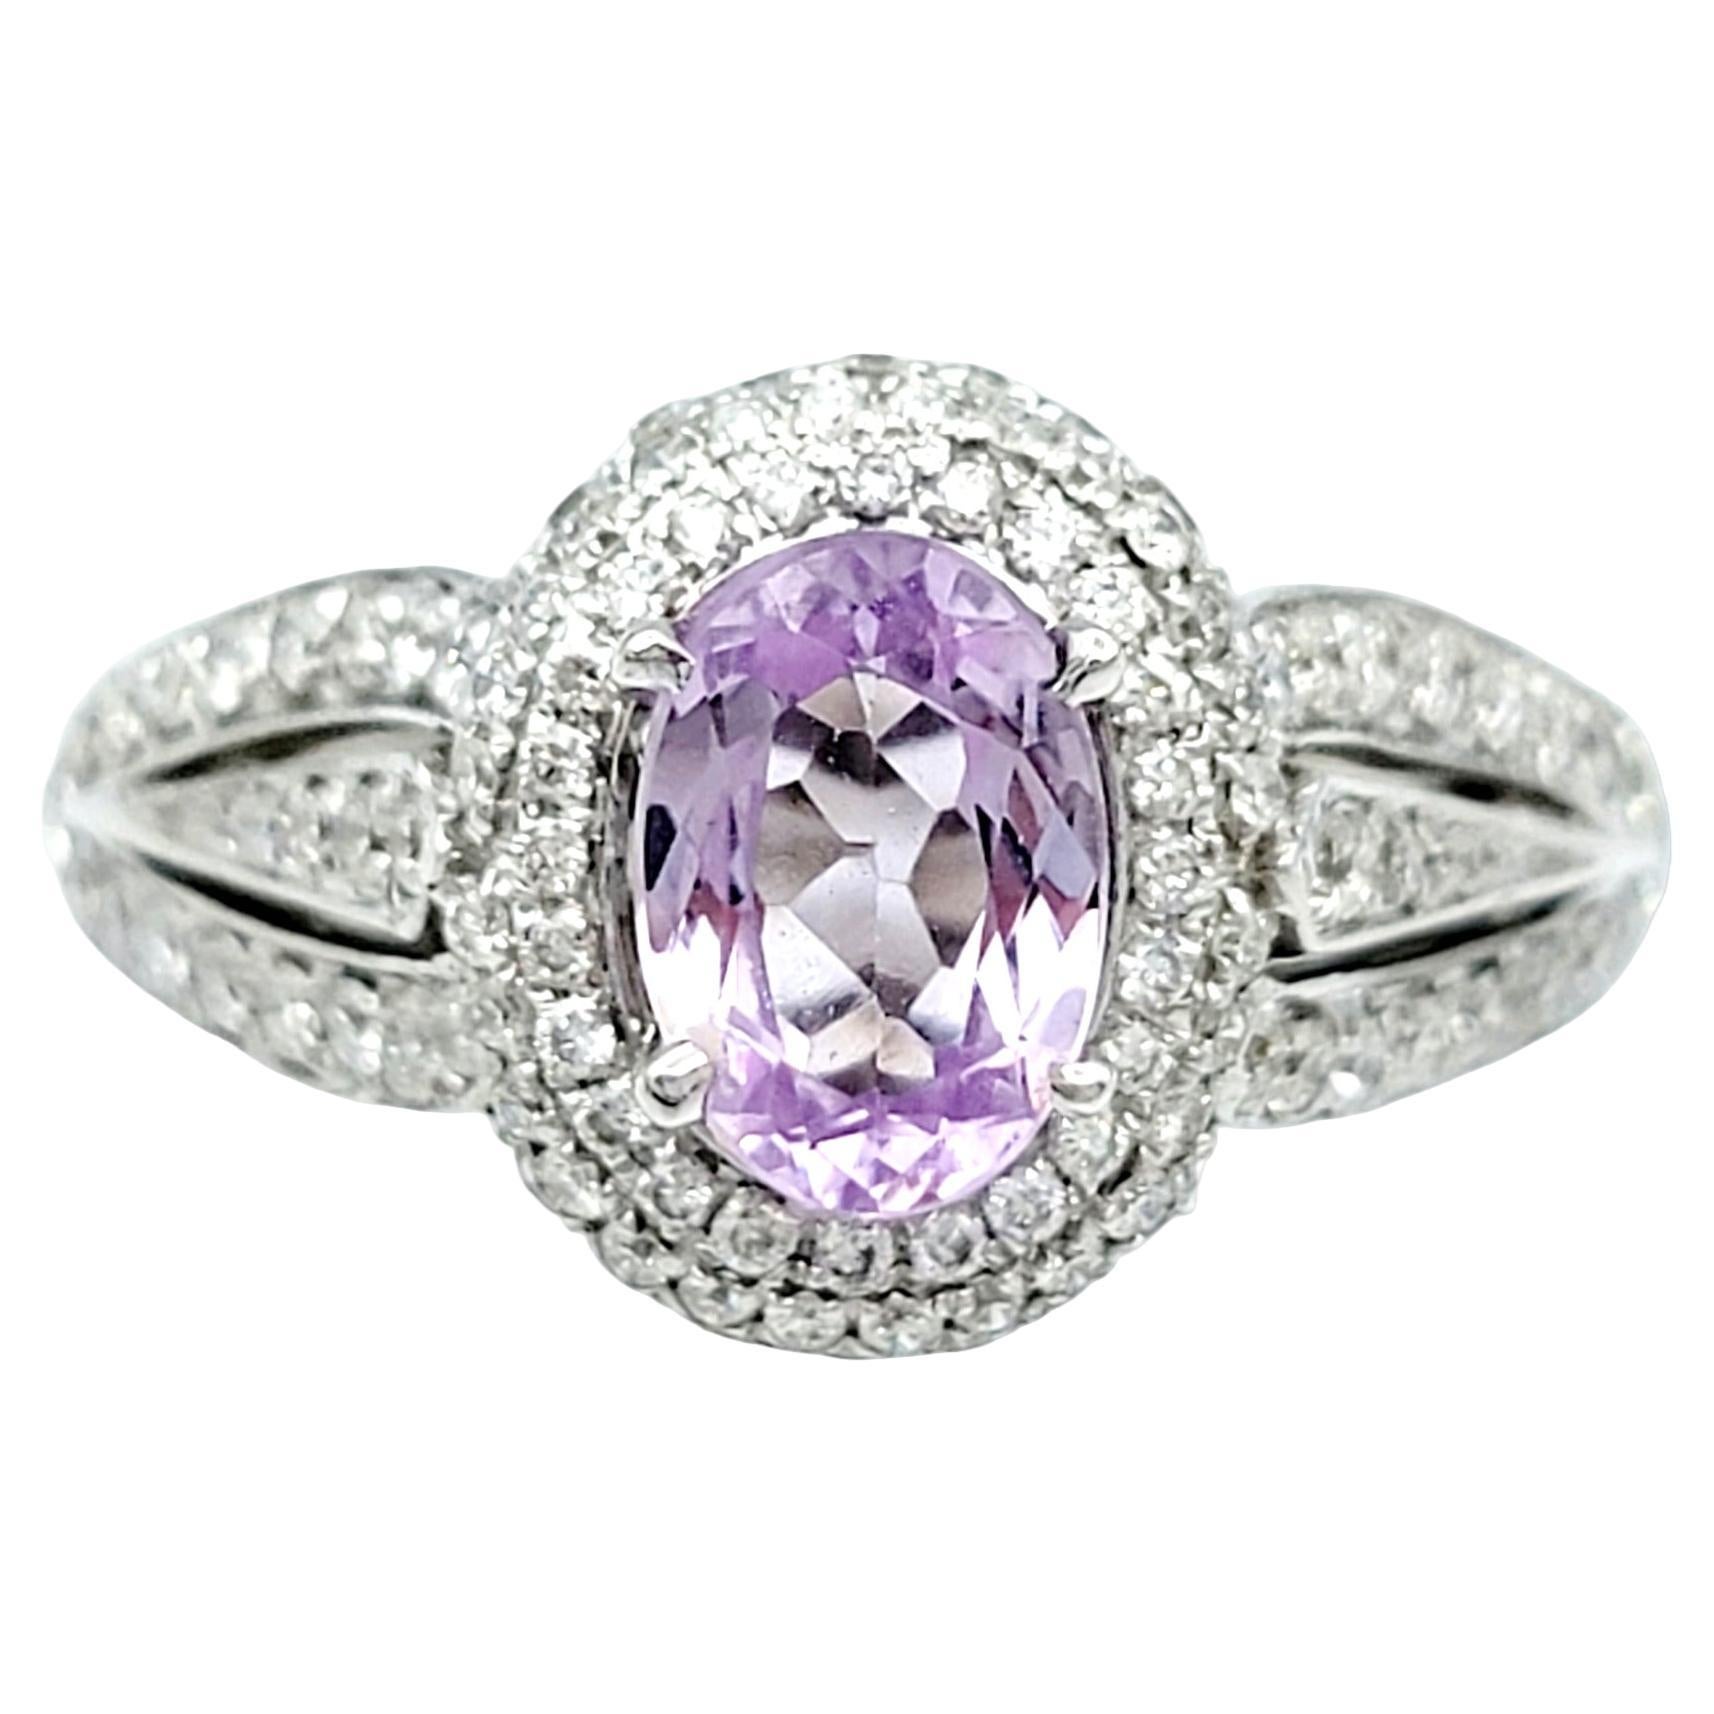 Oval Cut Lavender Spinel and Pavé Diamond Halo Ring Set in 14 Karat White Gold